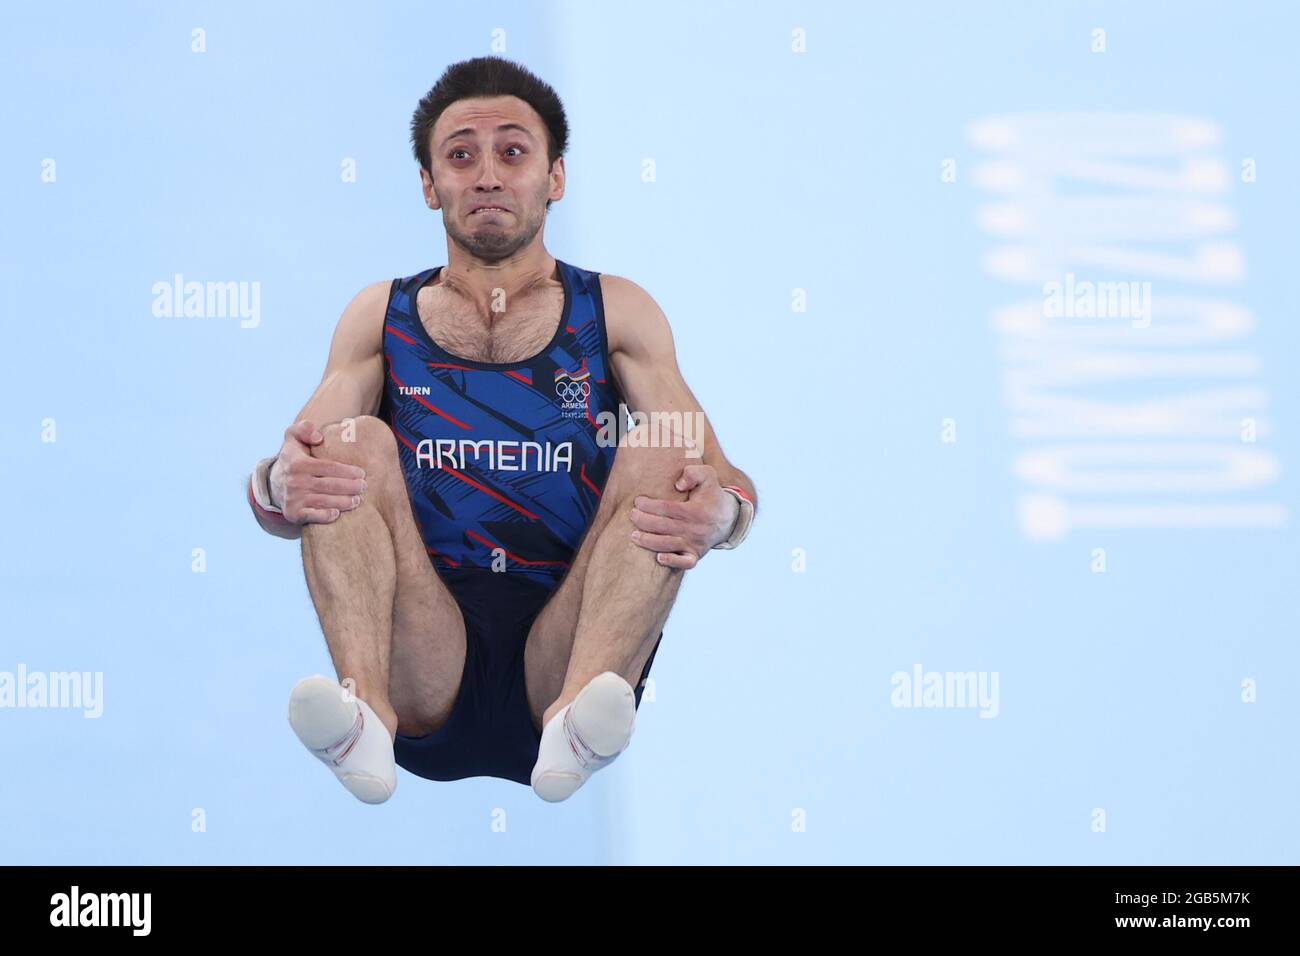 Tokyo, Japan. 2nd Aug, 2021. Artur Davtyan of Armenia competes during the artistic gymnastics men's vault final at the Tokyo 2020 Olympic Games in Tokyo, Japan, Aug. 2, 2021. Credit: Zheng Huansong/Xinhua/Alamy Live News Stock Photo